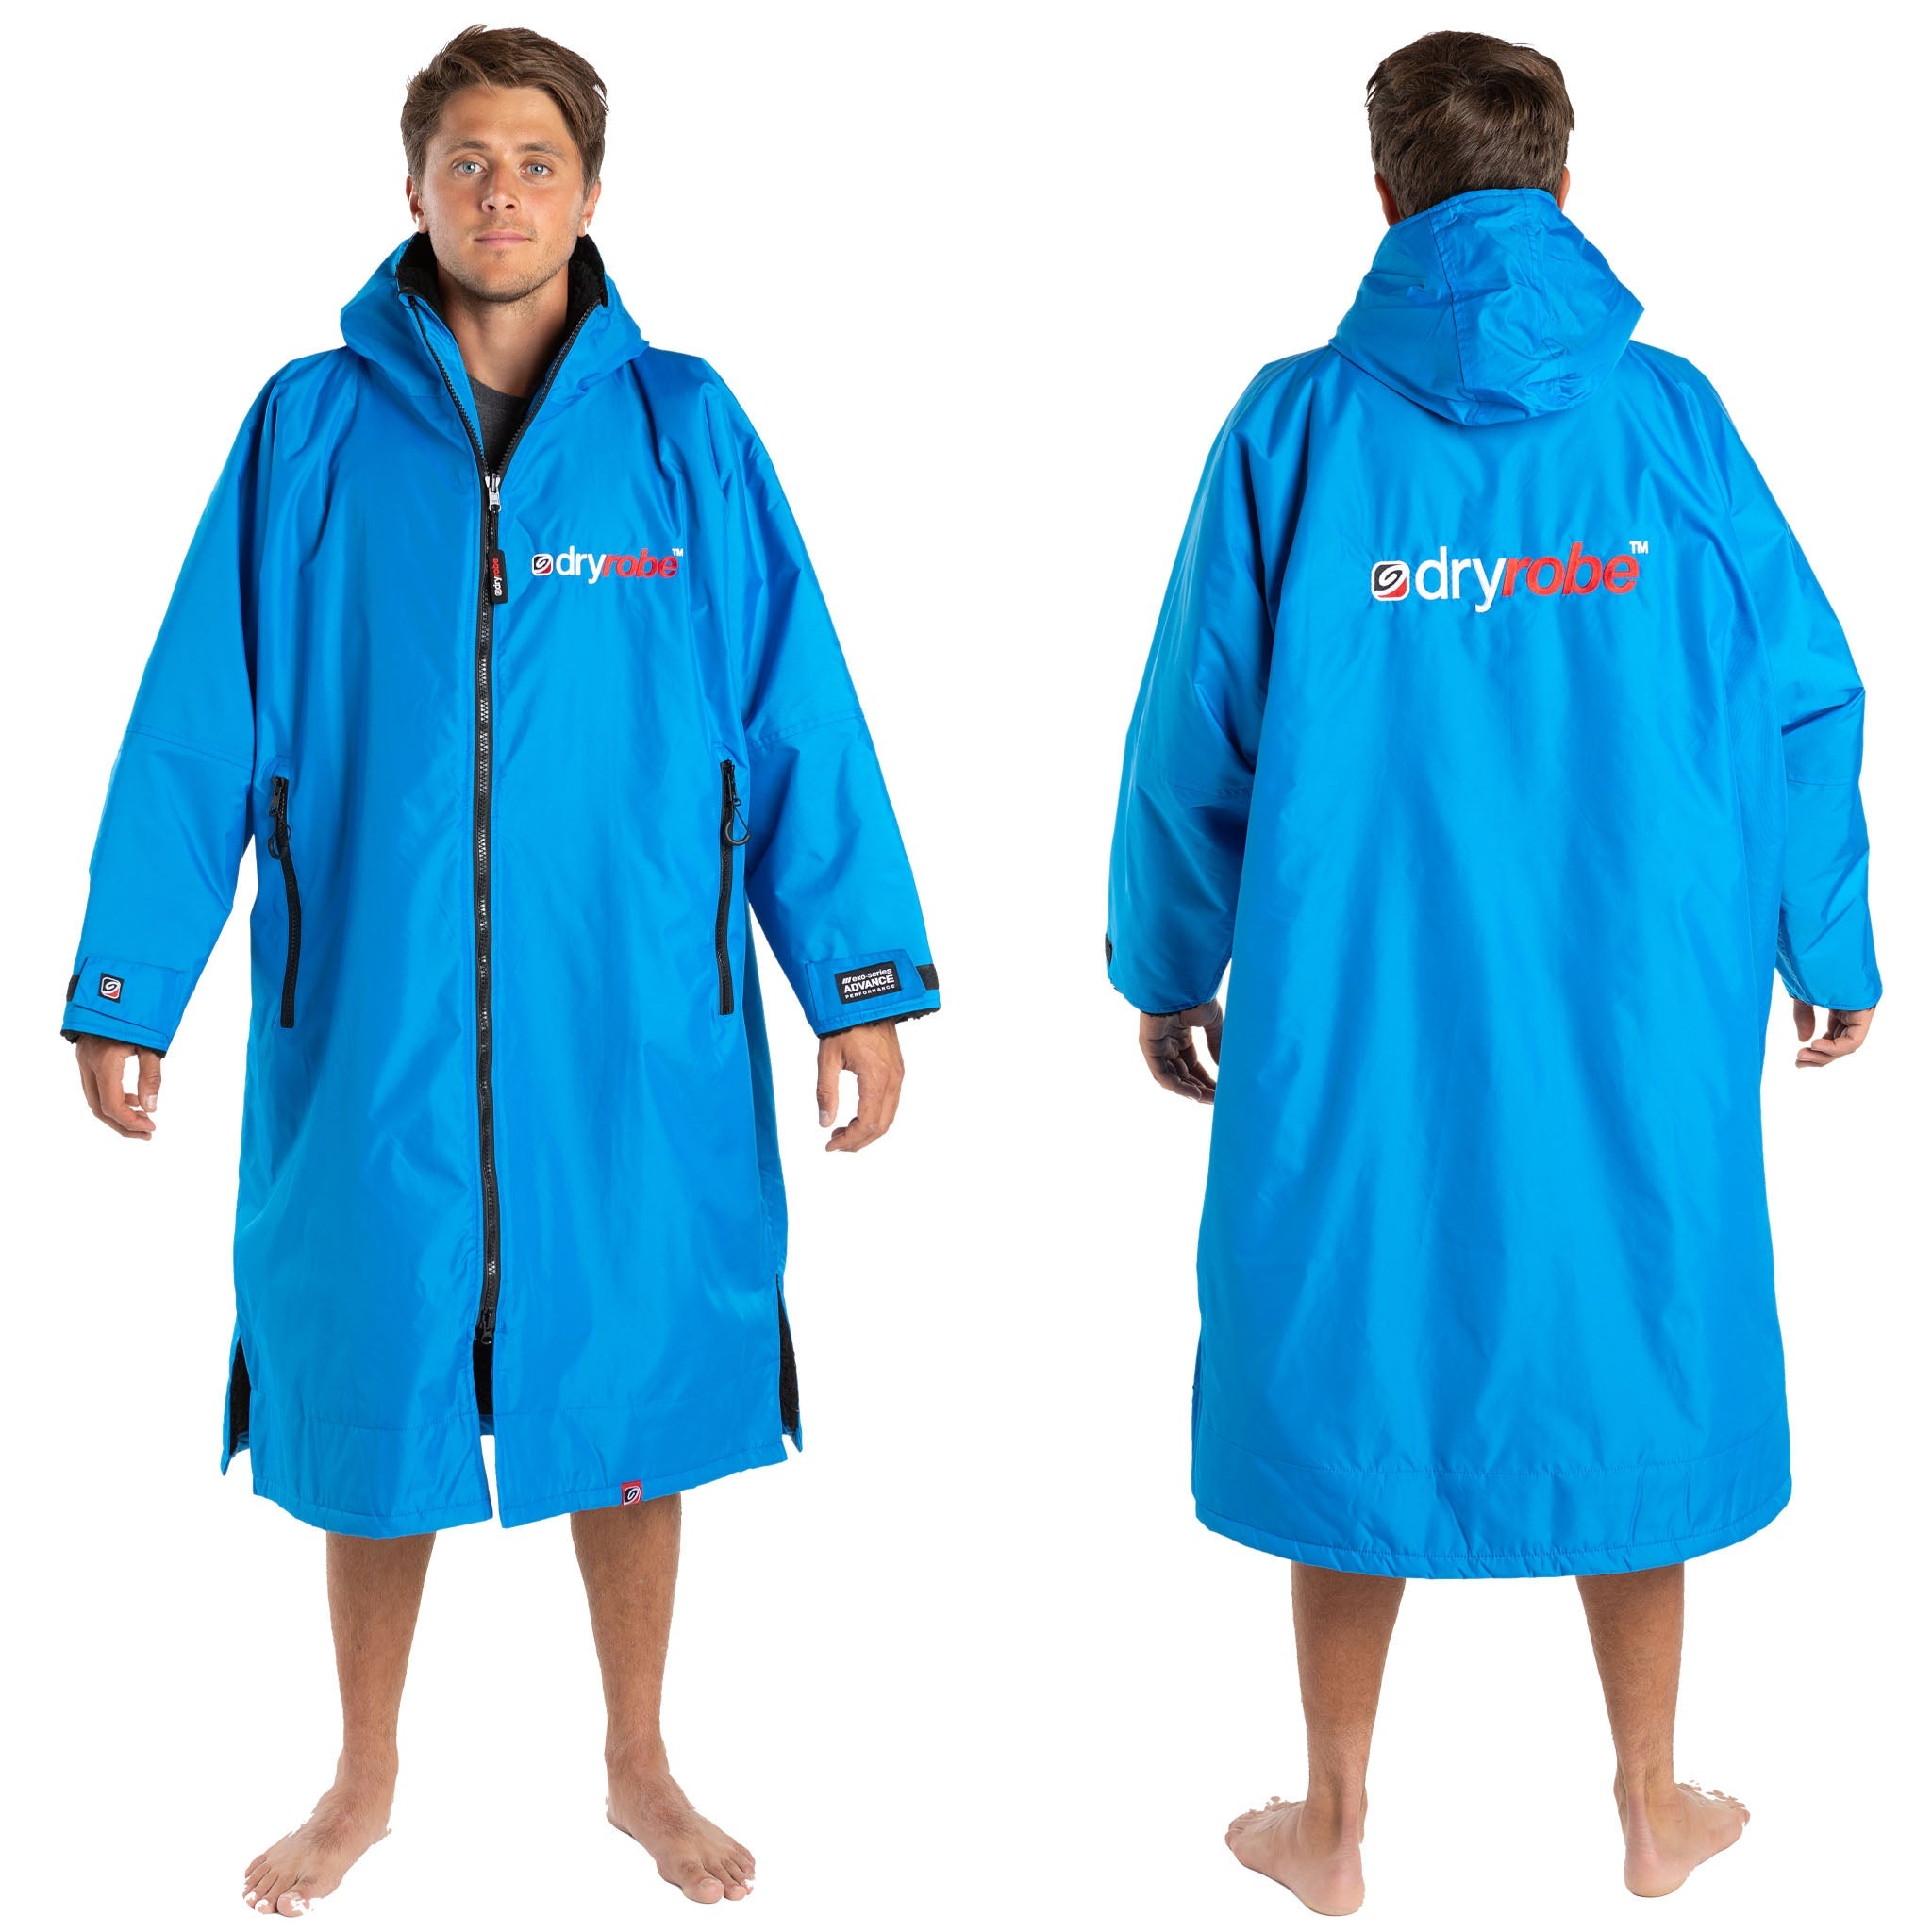 dryrobe Advance Long Sleeve | Cobalt Blue/Black front and back view